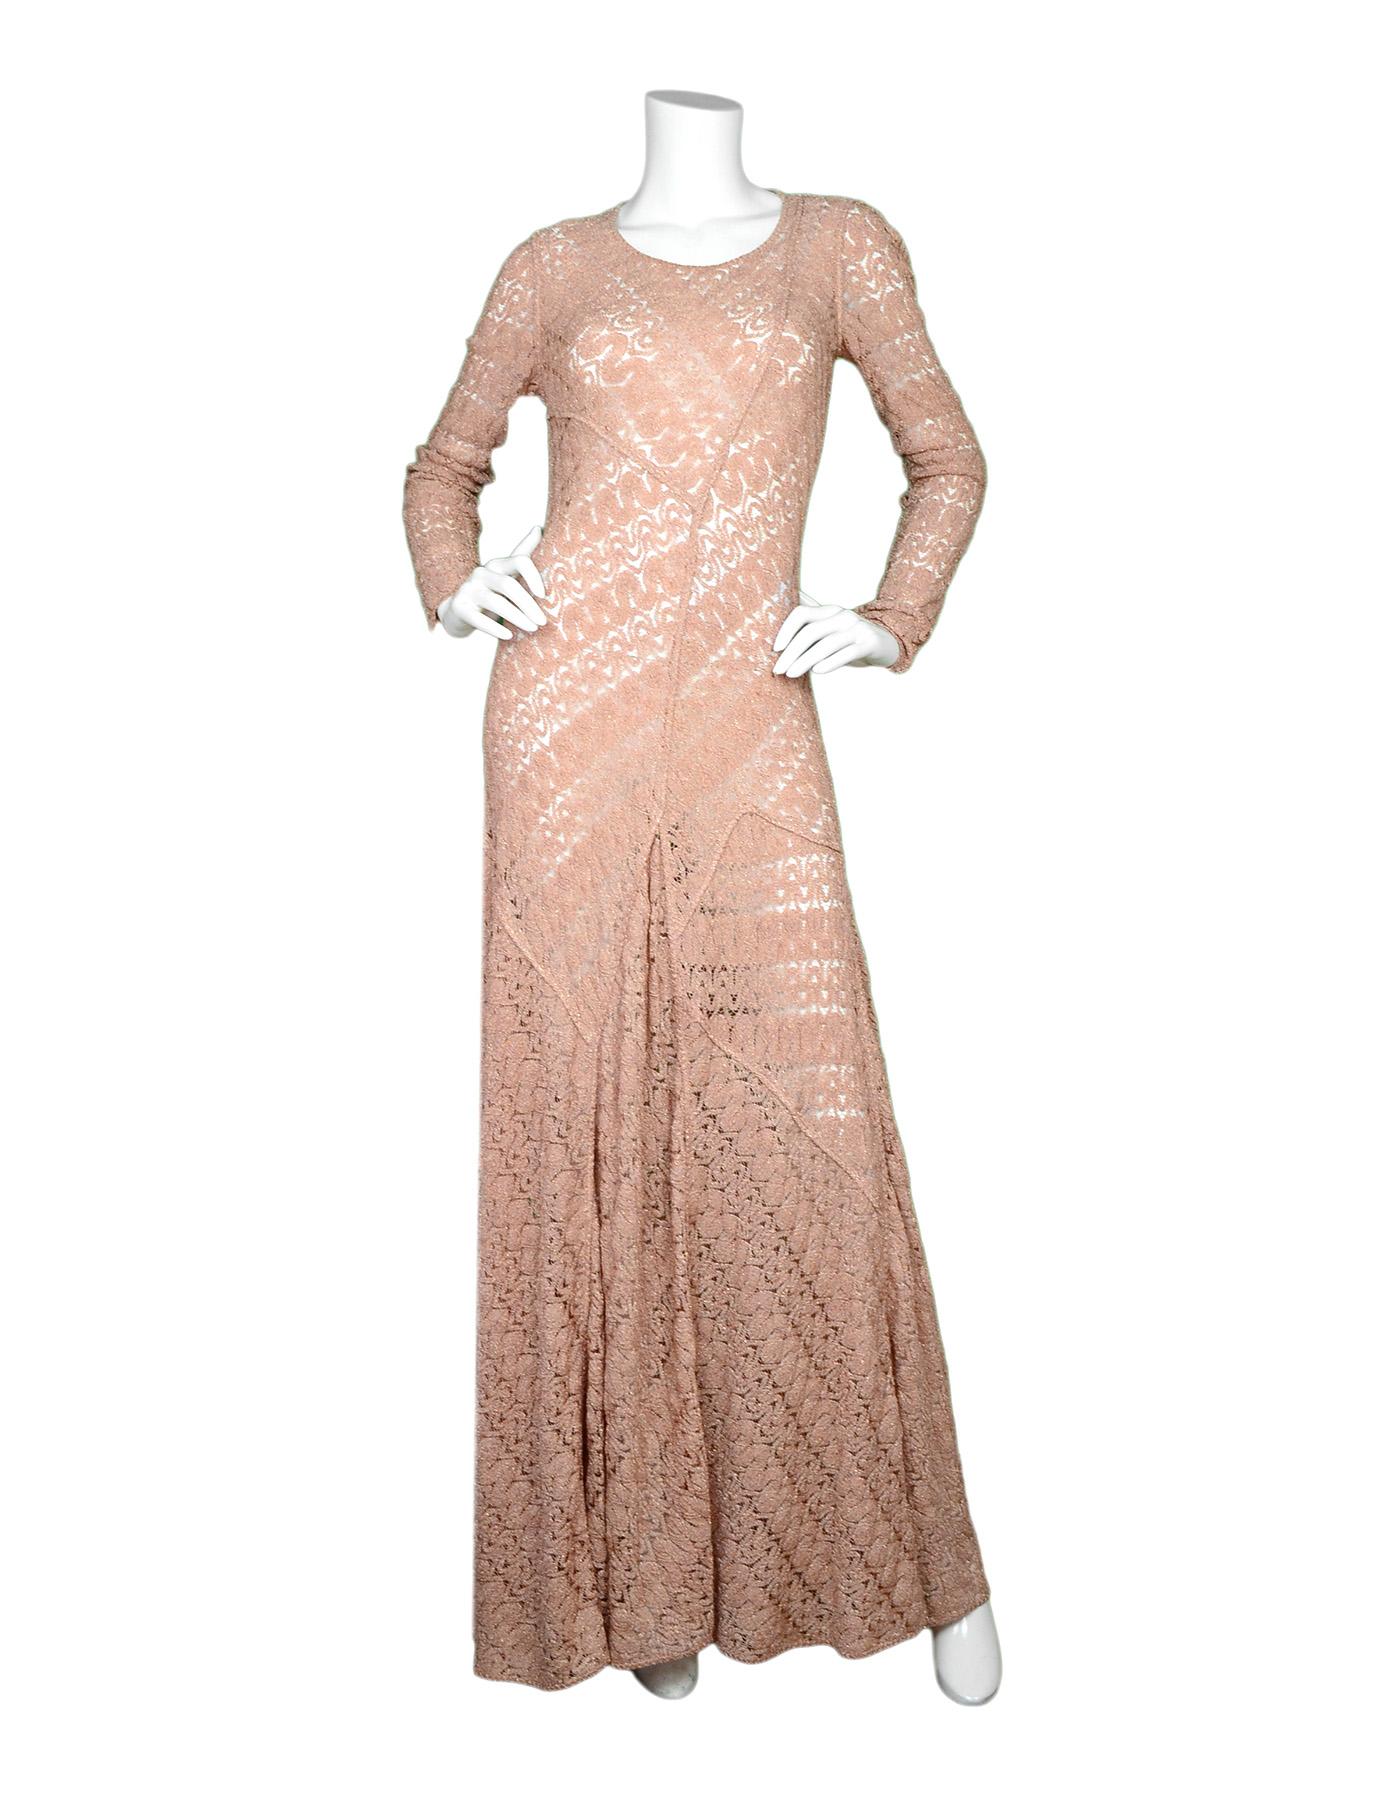 Missoni Pink Rosegold Sparkle Knit Lace Longsleeve Maxi Dress Sz S

Made In:  Italy
Color: Rosegold pink
Materials: No composition tag, knit/lace fabric with some stretch 
Lining: Unlined 
Opening/Closure: Pull over
Overall Condition: Excellent